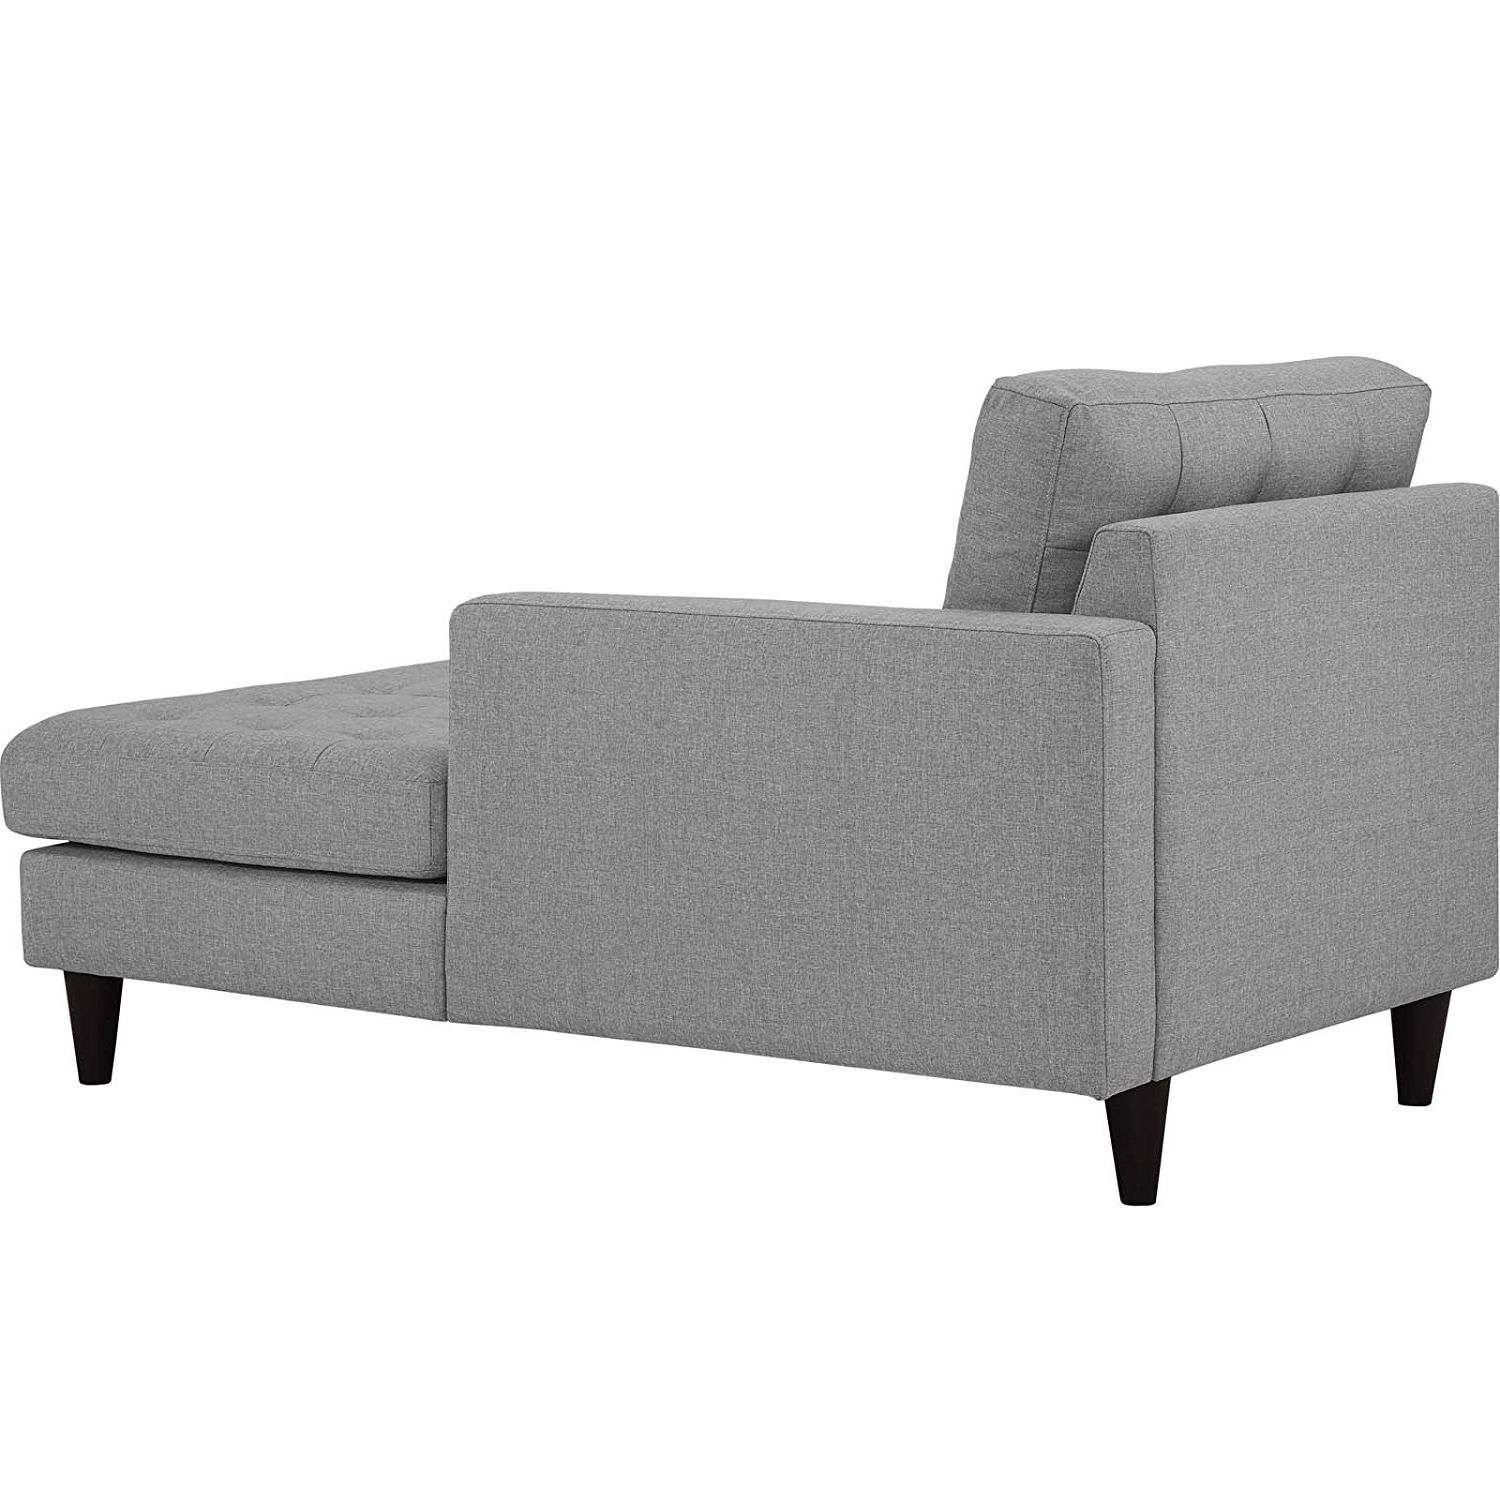 Most Recently Released Right Arm Chaise Lounges Throughout Amazon: Modway Empress Mid Century Modern Upholstered Fabric (View 5 of 15)